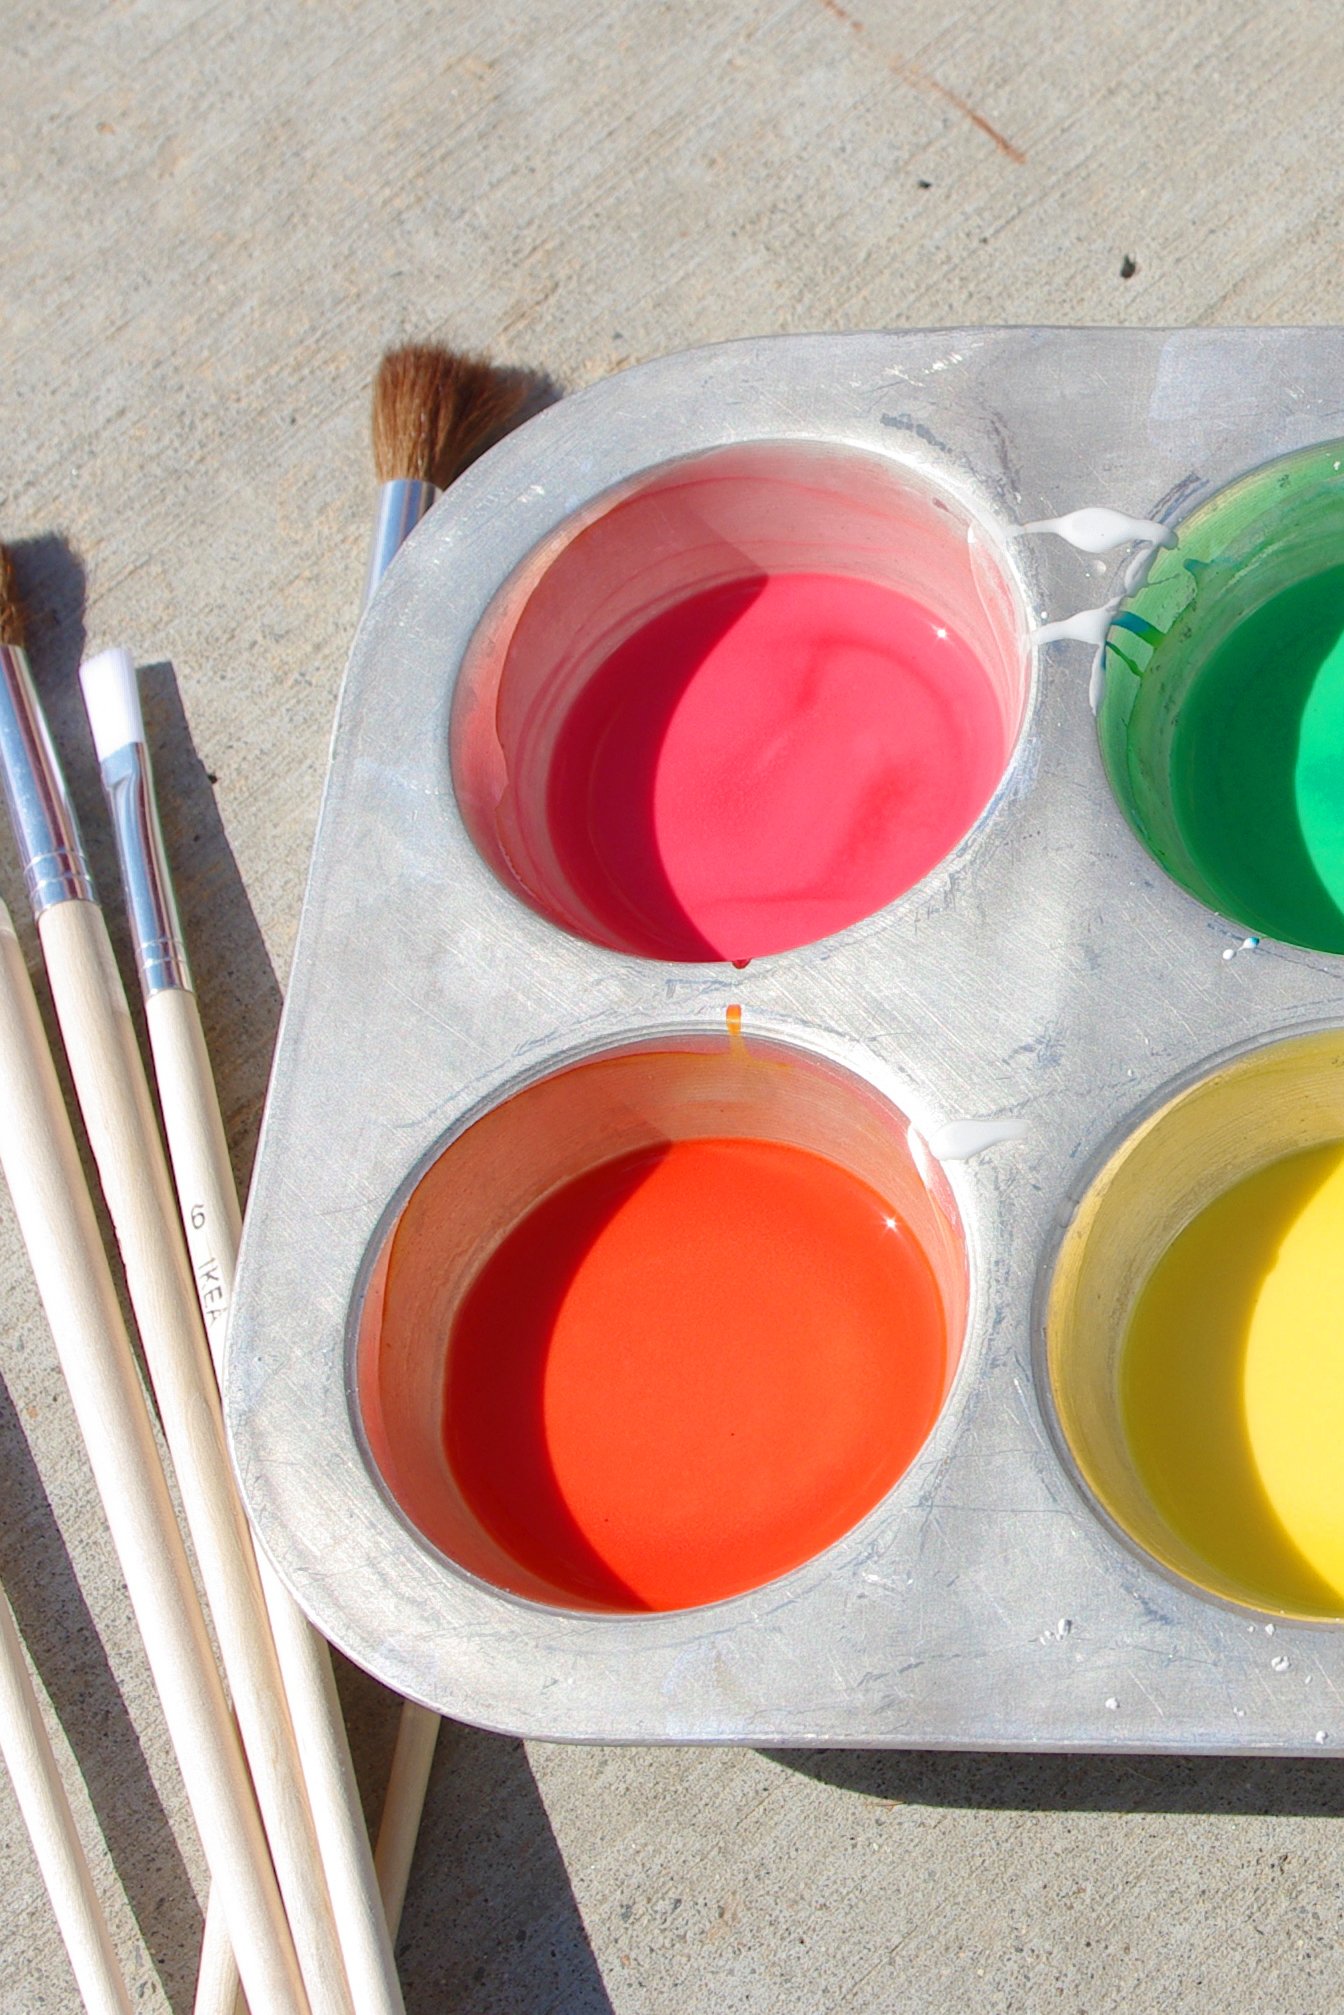 Muffin tin filled with colorful sidewalk chalk paint on sidewalk next to paintbrushes